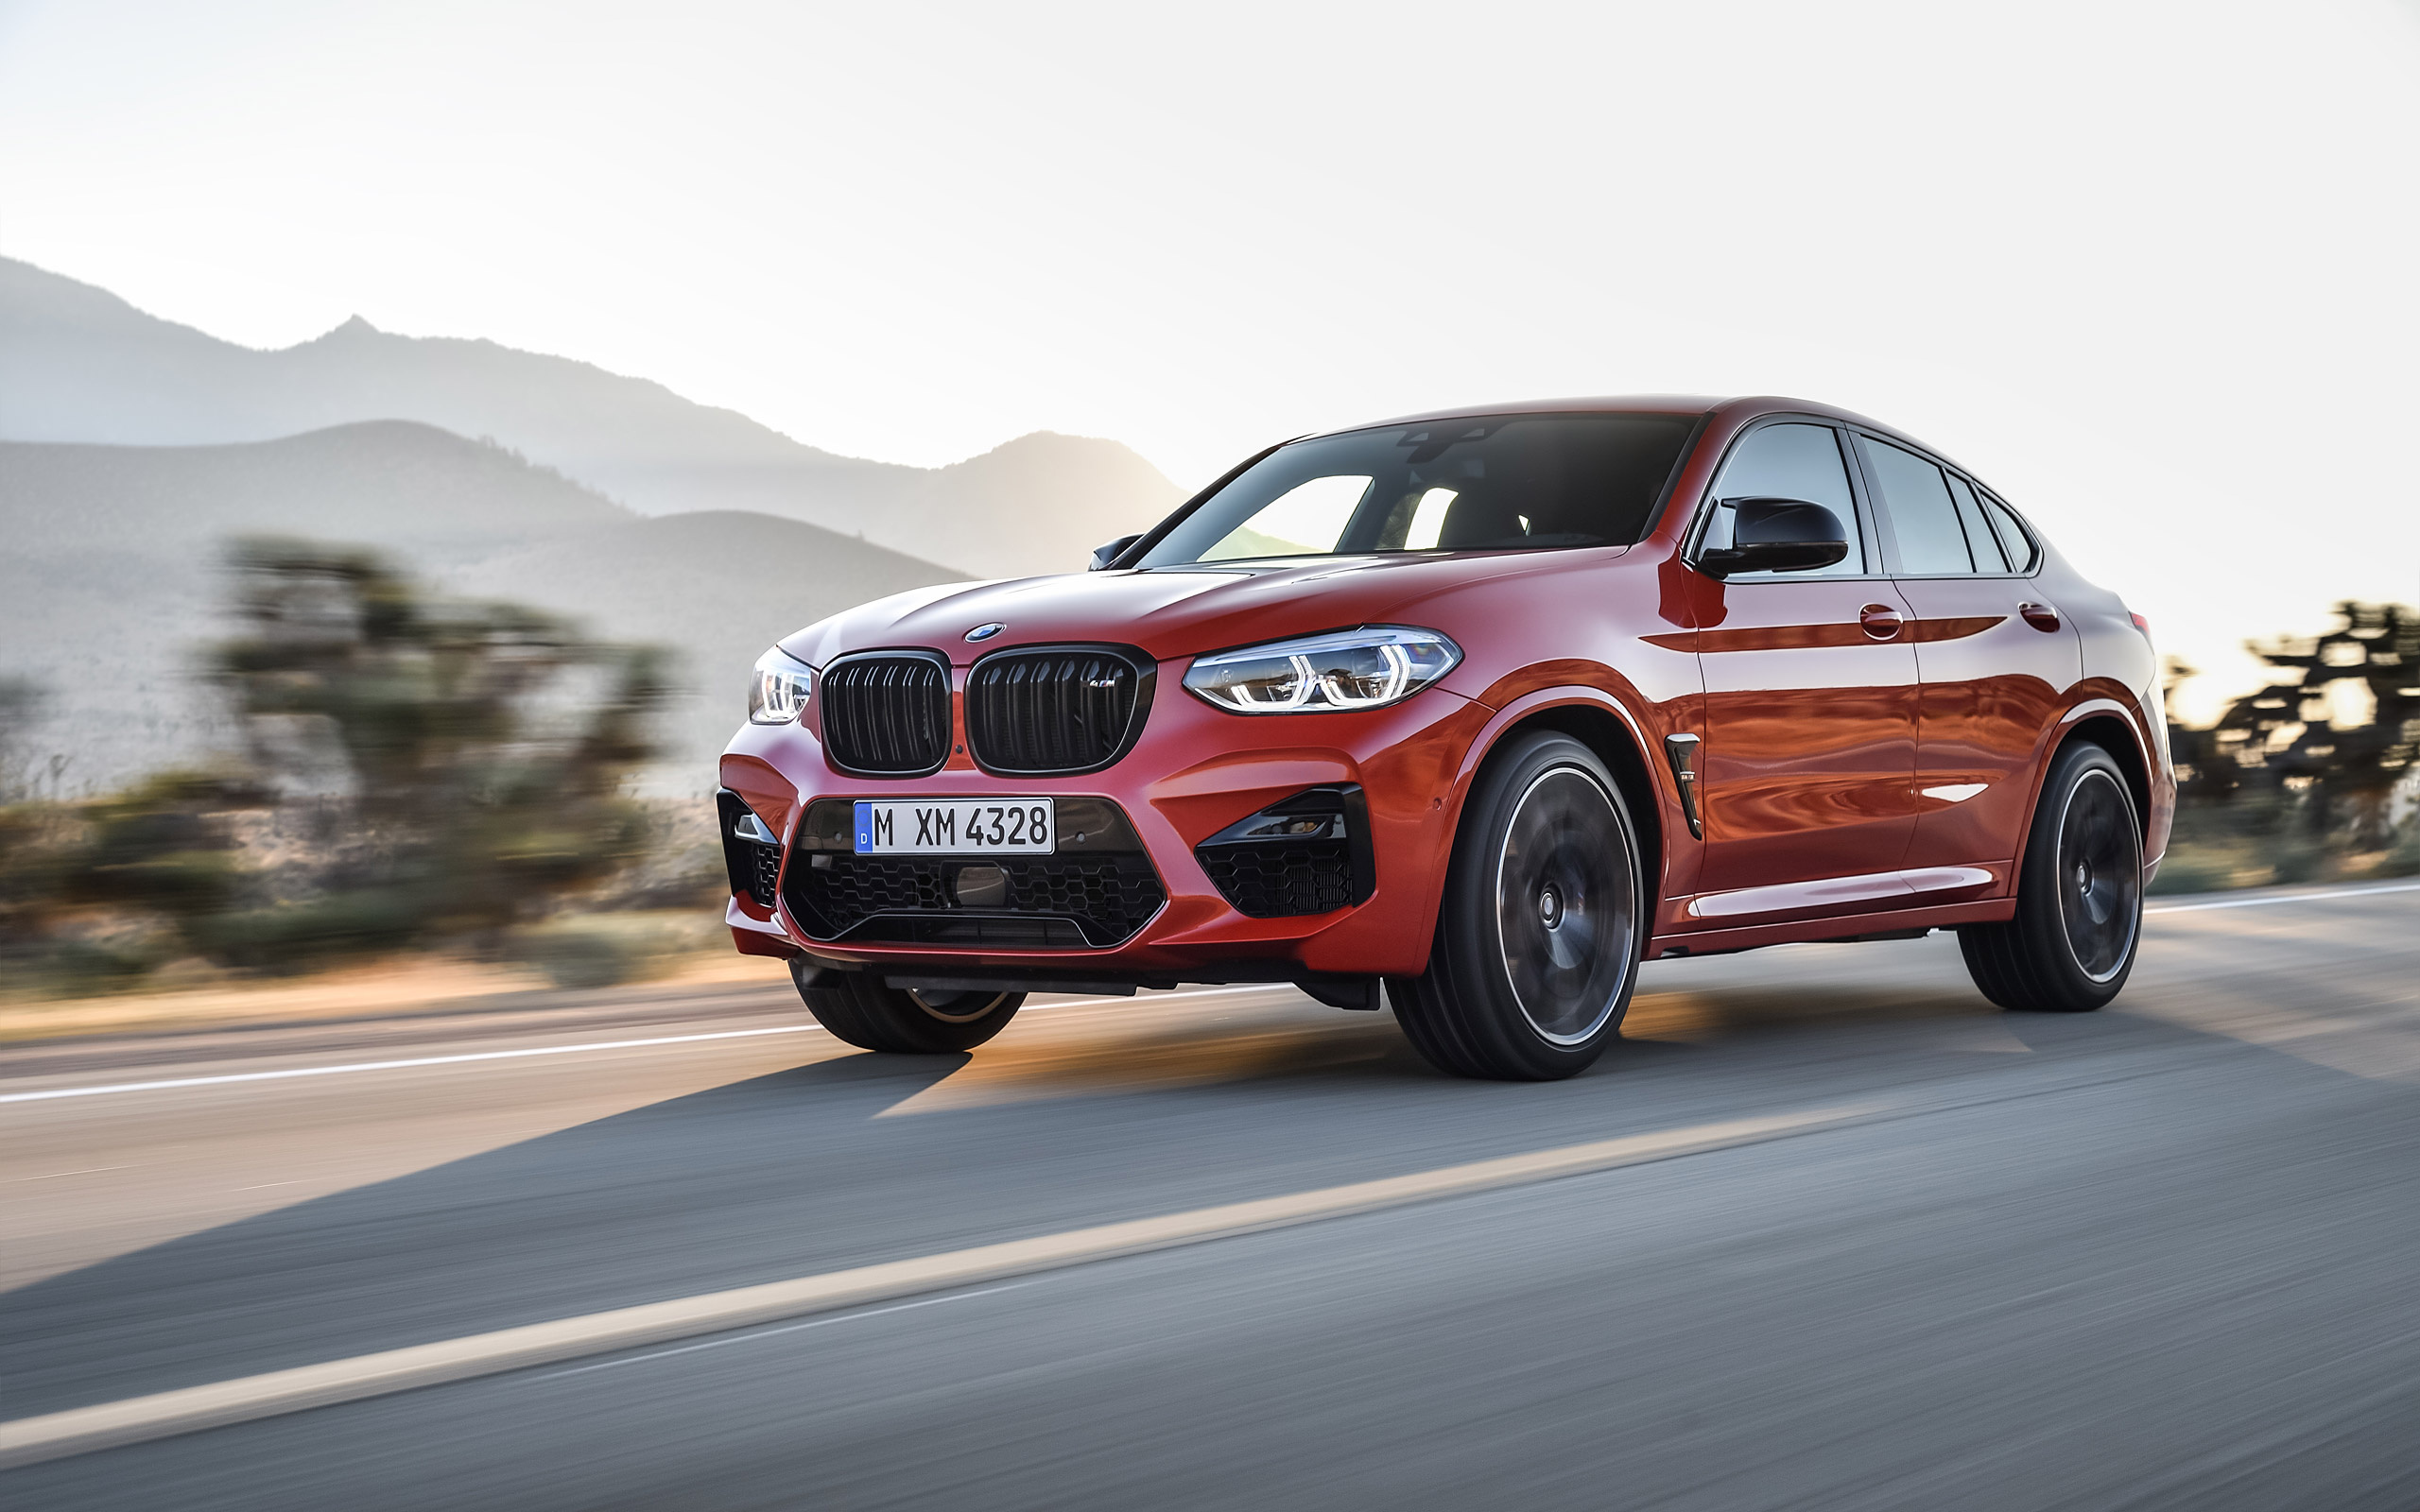 BMW X4 M Competition, 2020 model, Red Sports Crossover, 2560x1600 HD Desktop